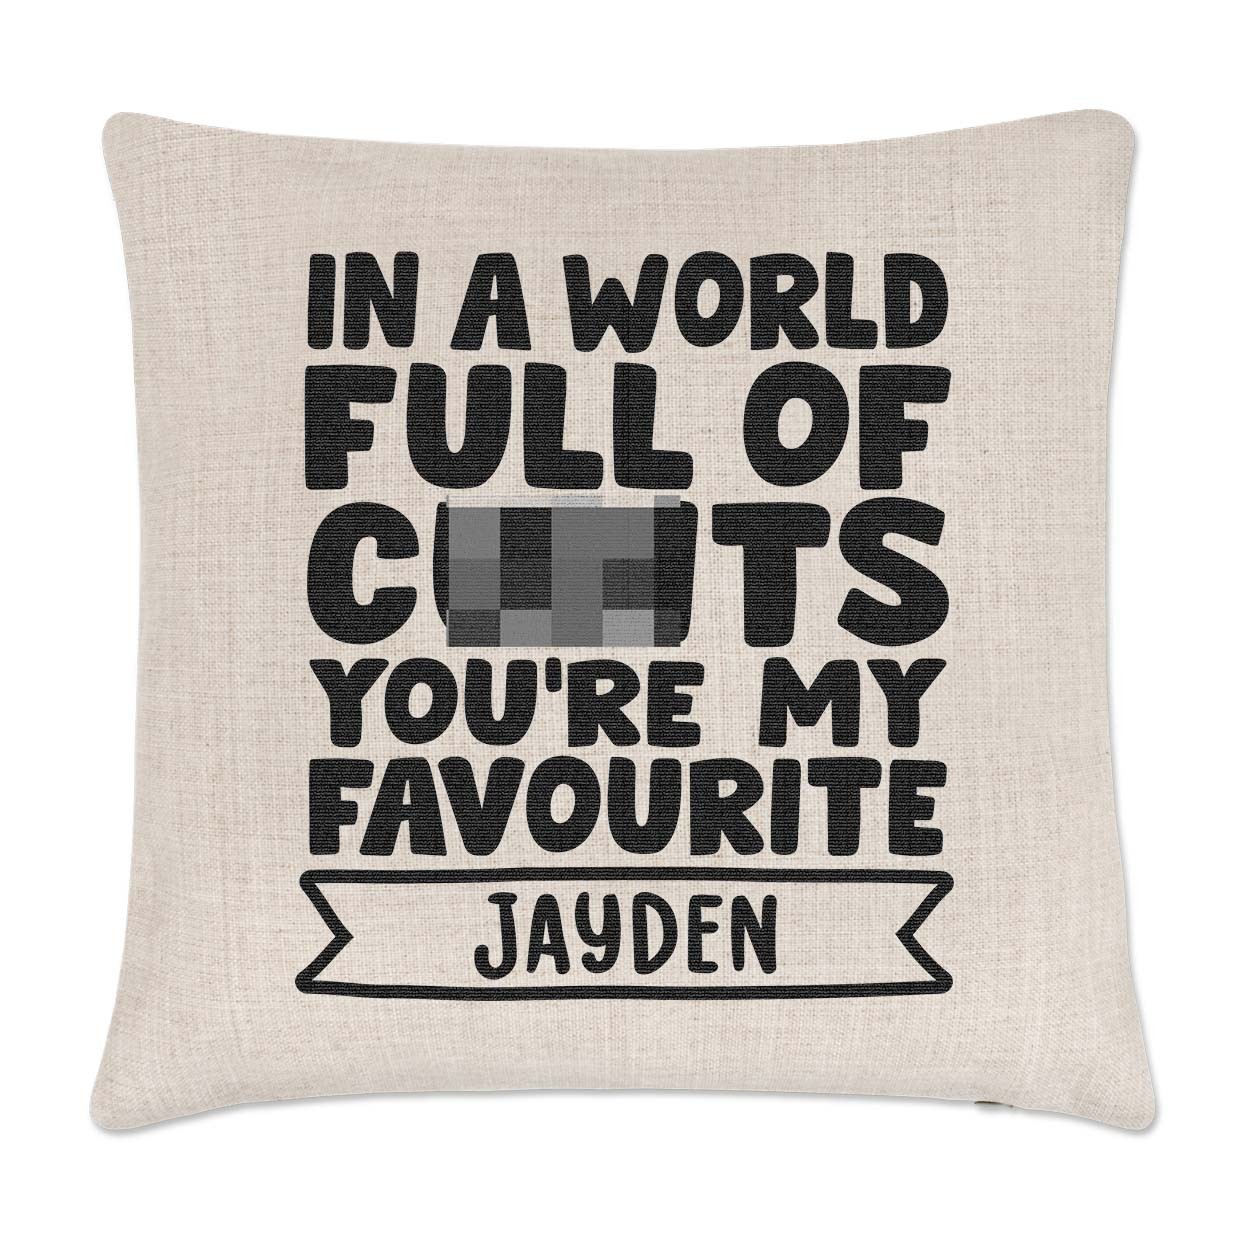 Personalised In A World Full Of C*nts You're My Favourite Cushion Cover